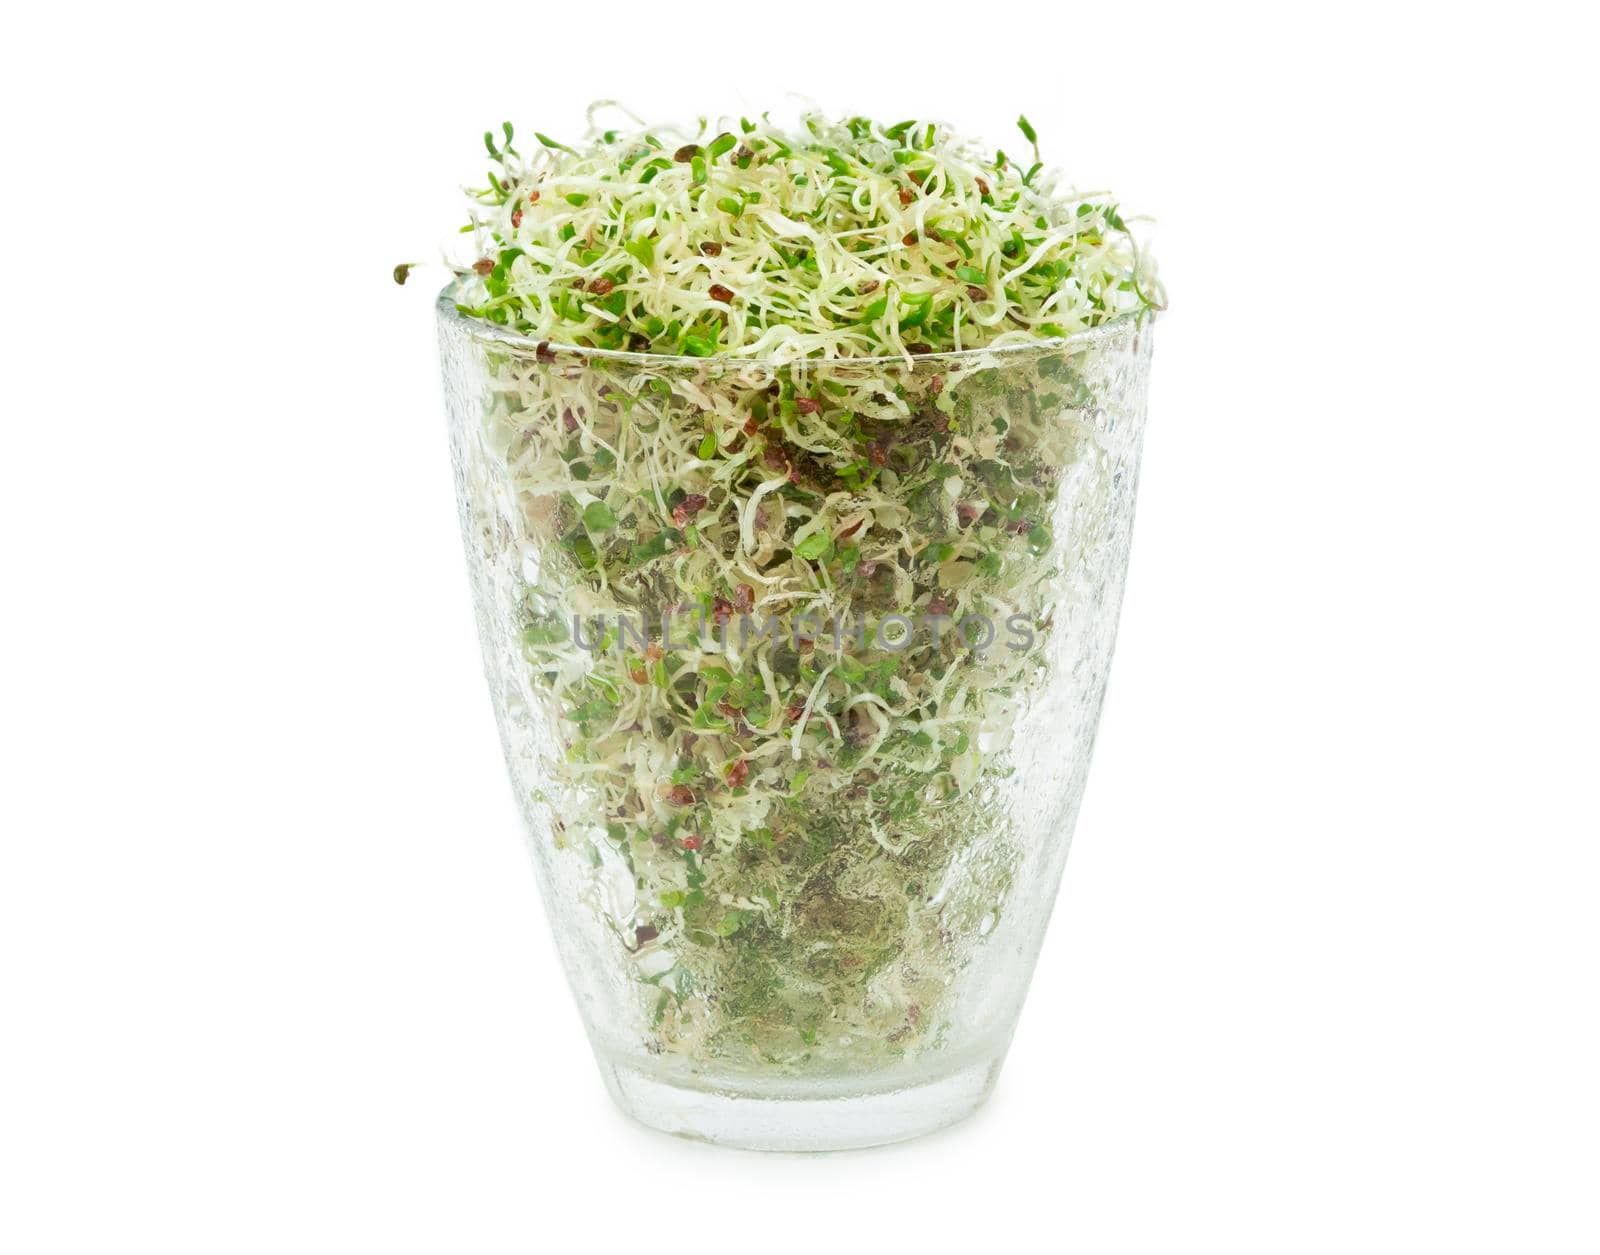 Organic young alfalfa sprouts in a glass on white background by SlayCer